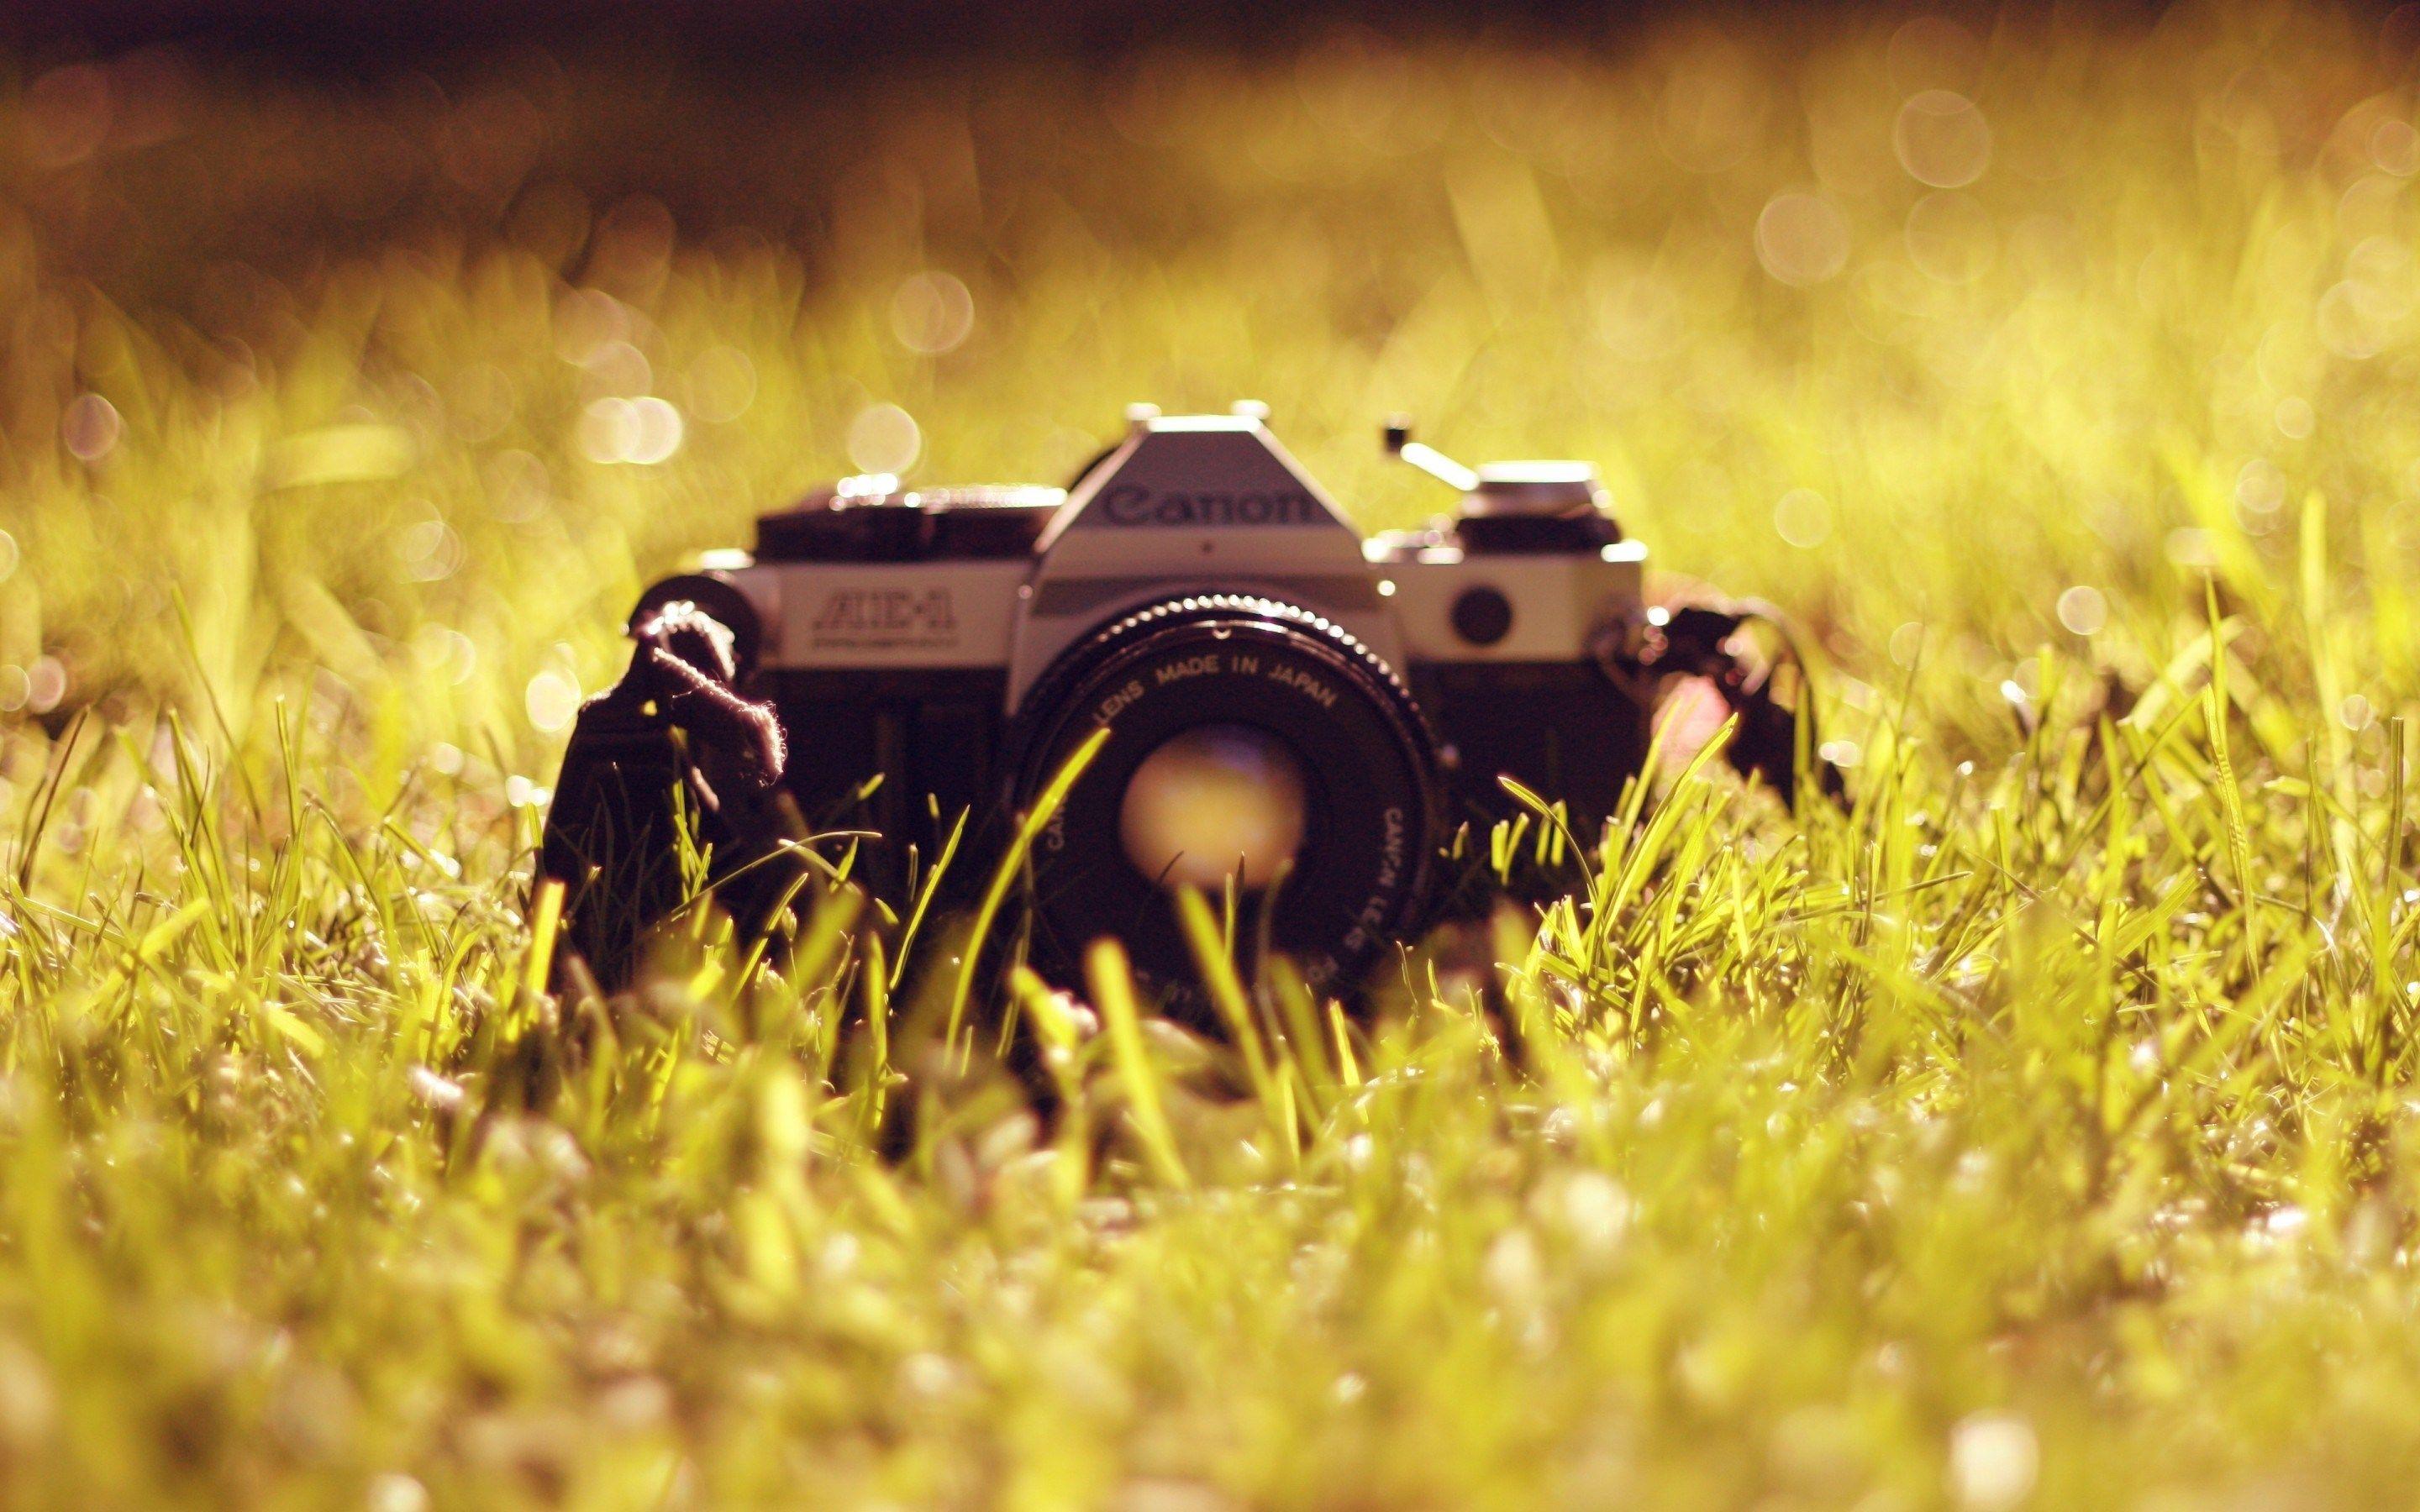 Classic camera canon on green grass taken on picture